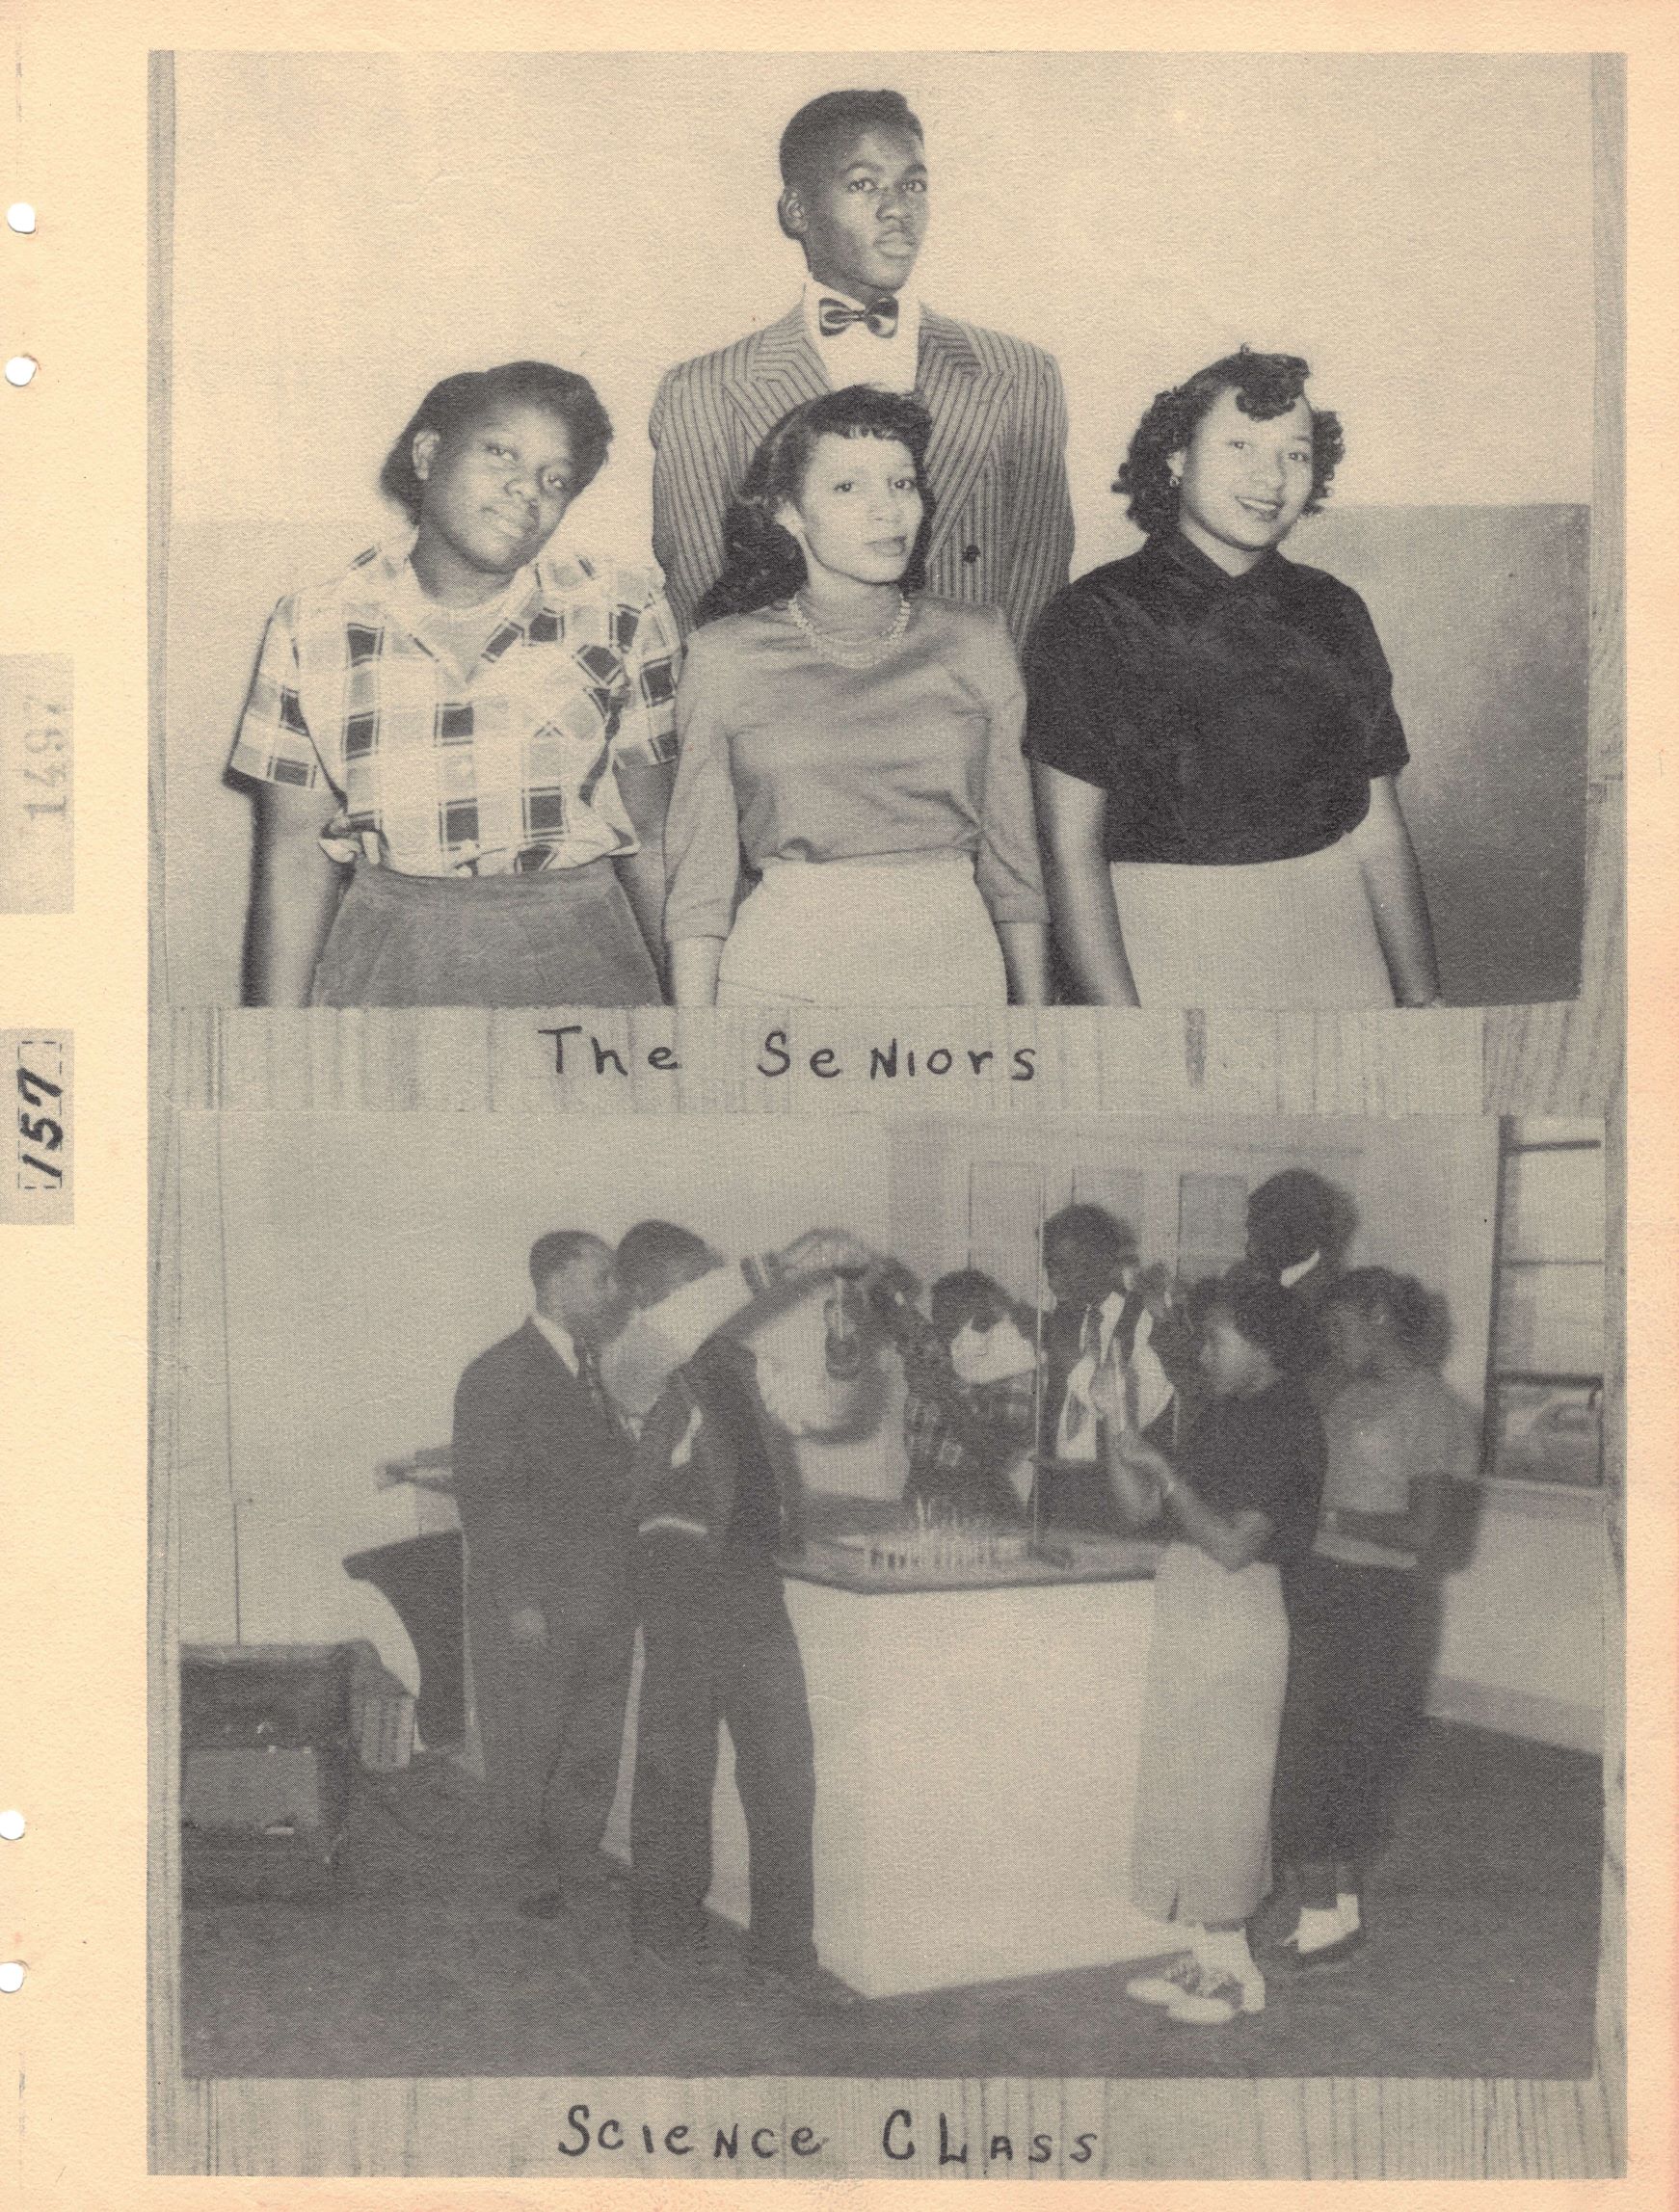 Group of three women and one man over the caption "The Seniors" and photograph of a group of students around a lab table using lab equipments labled "Science Class"